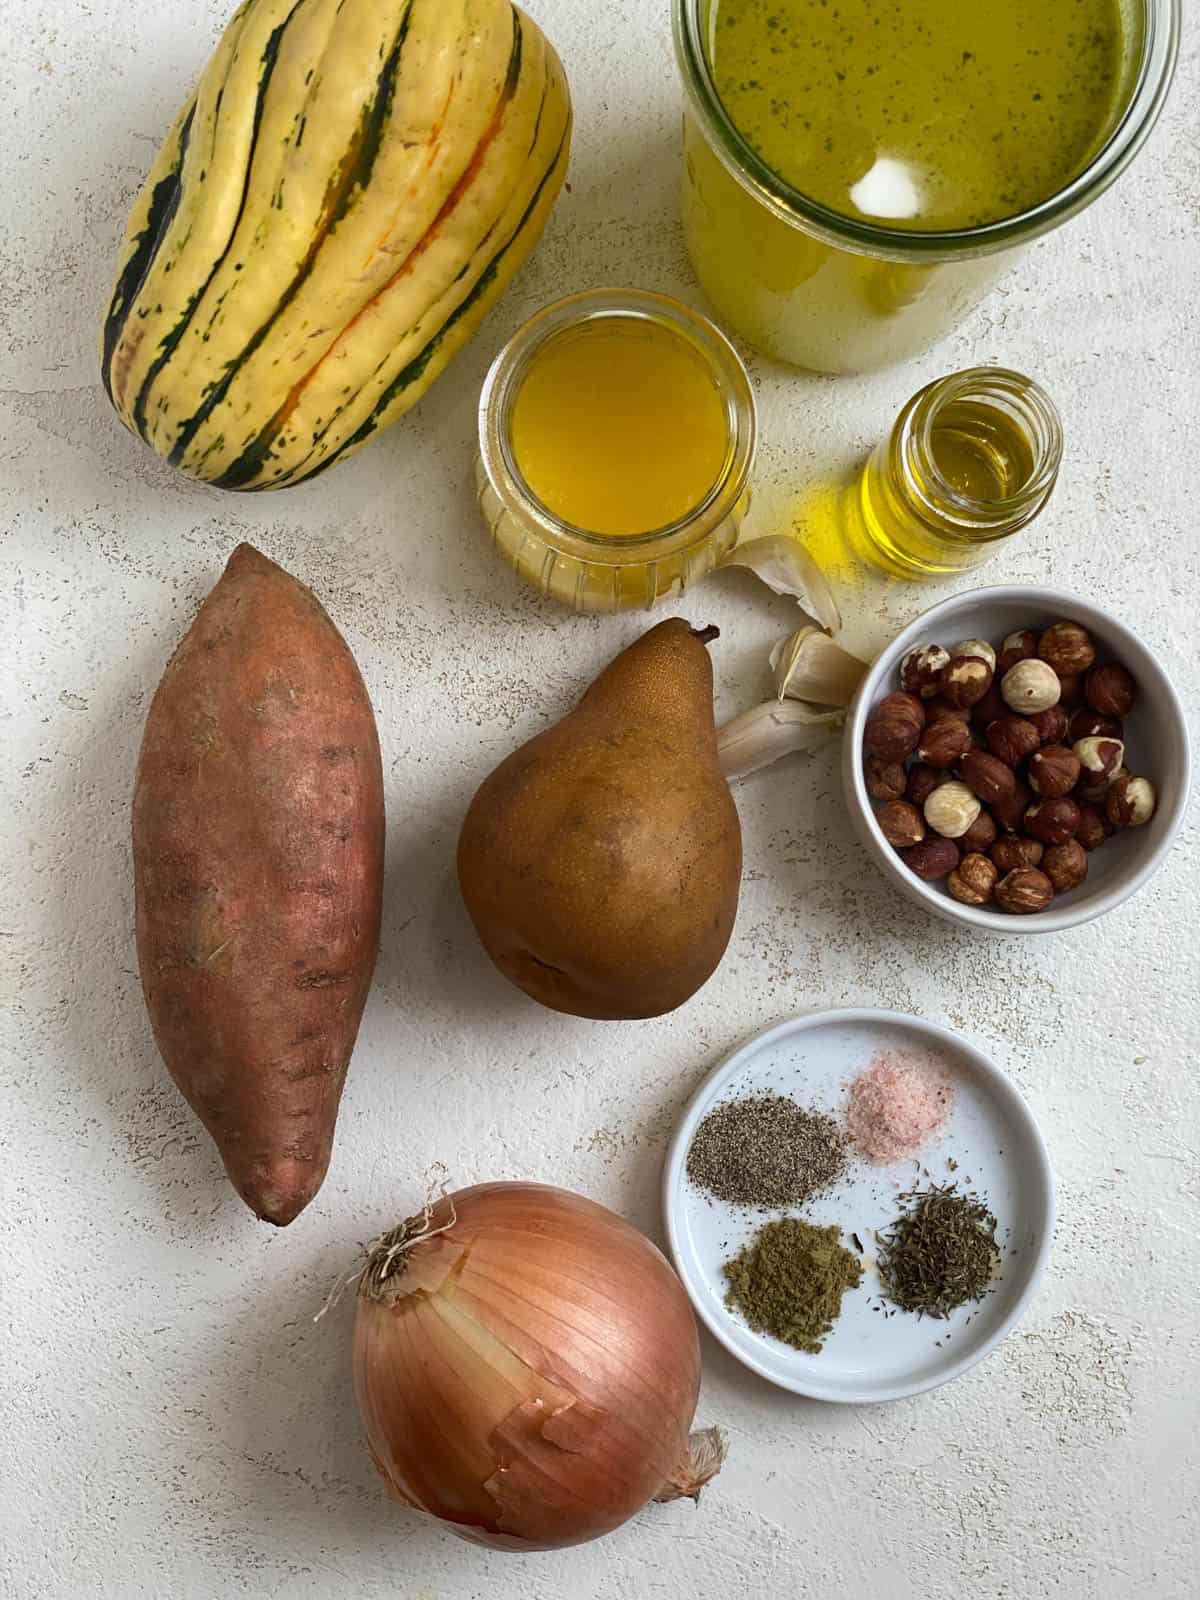 ingredients for Roasted Delicata Squash and Sweet Potato Soup against a light surface